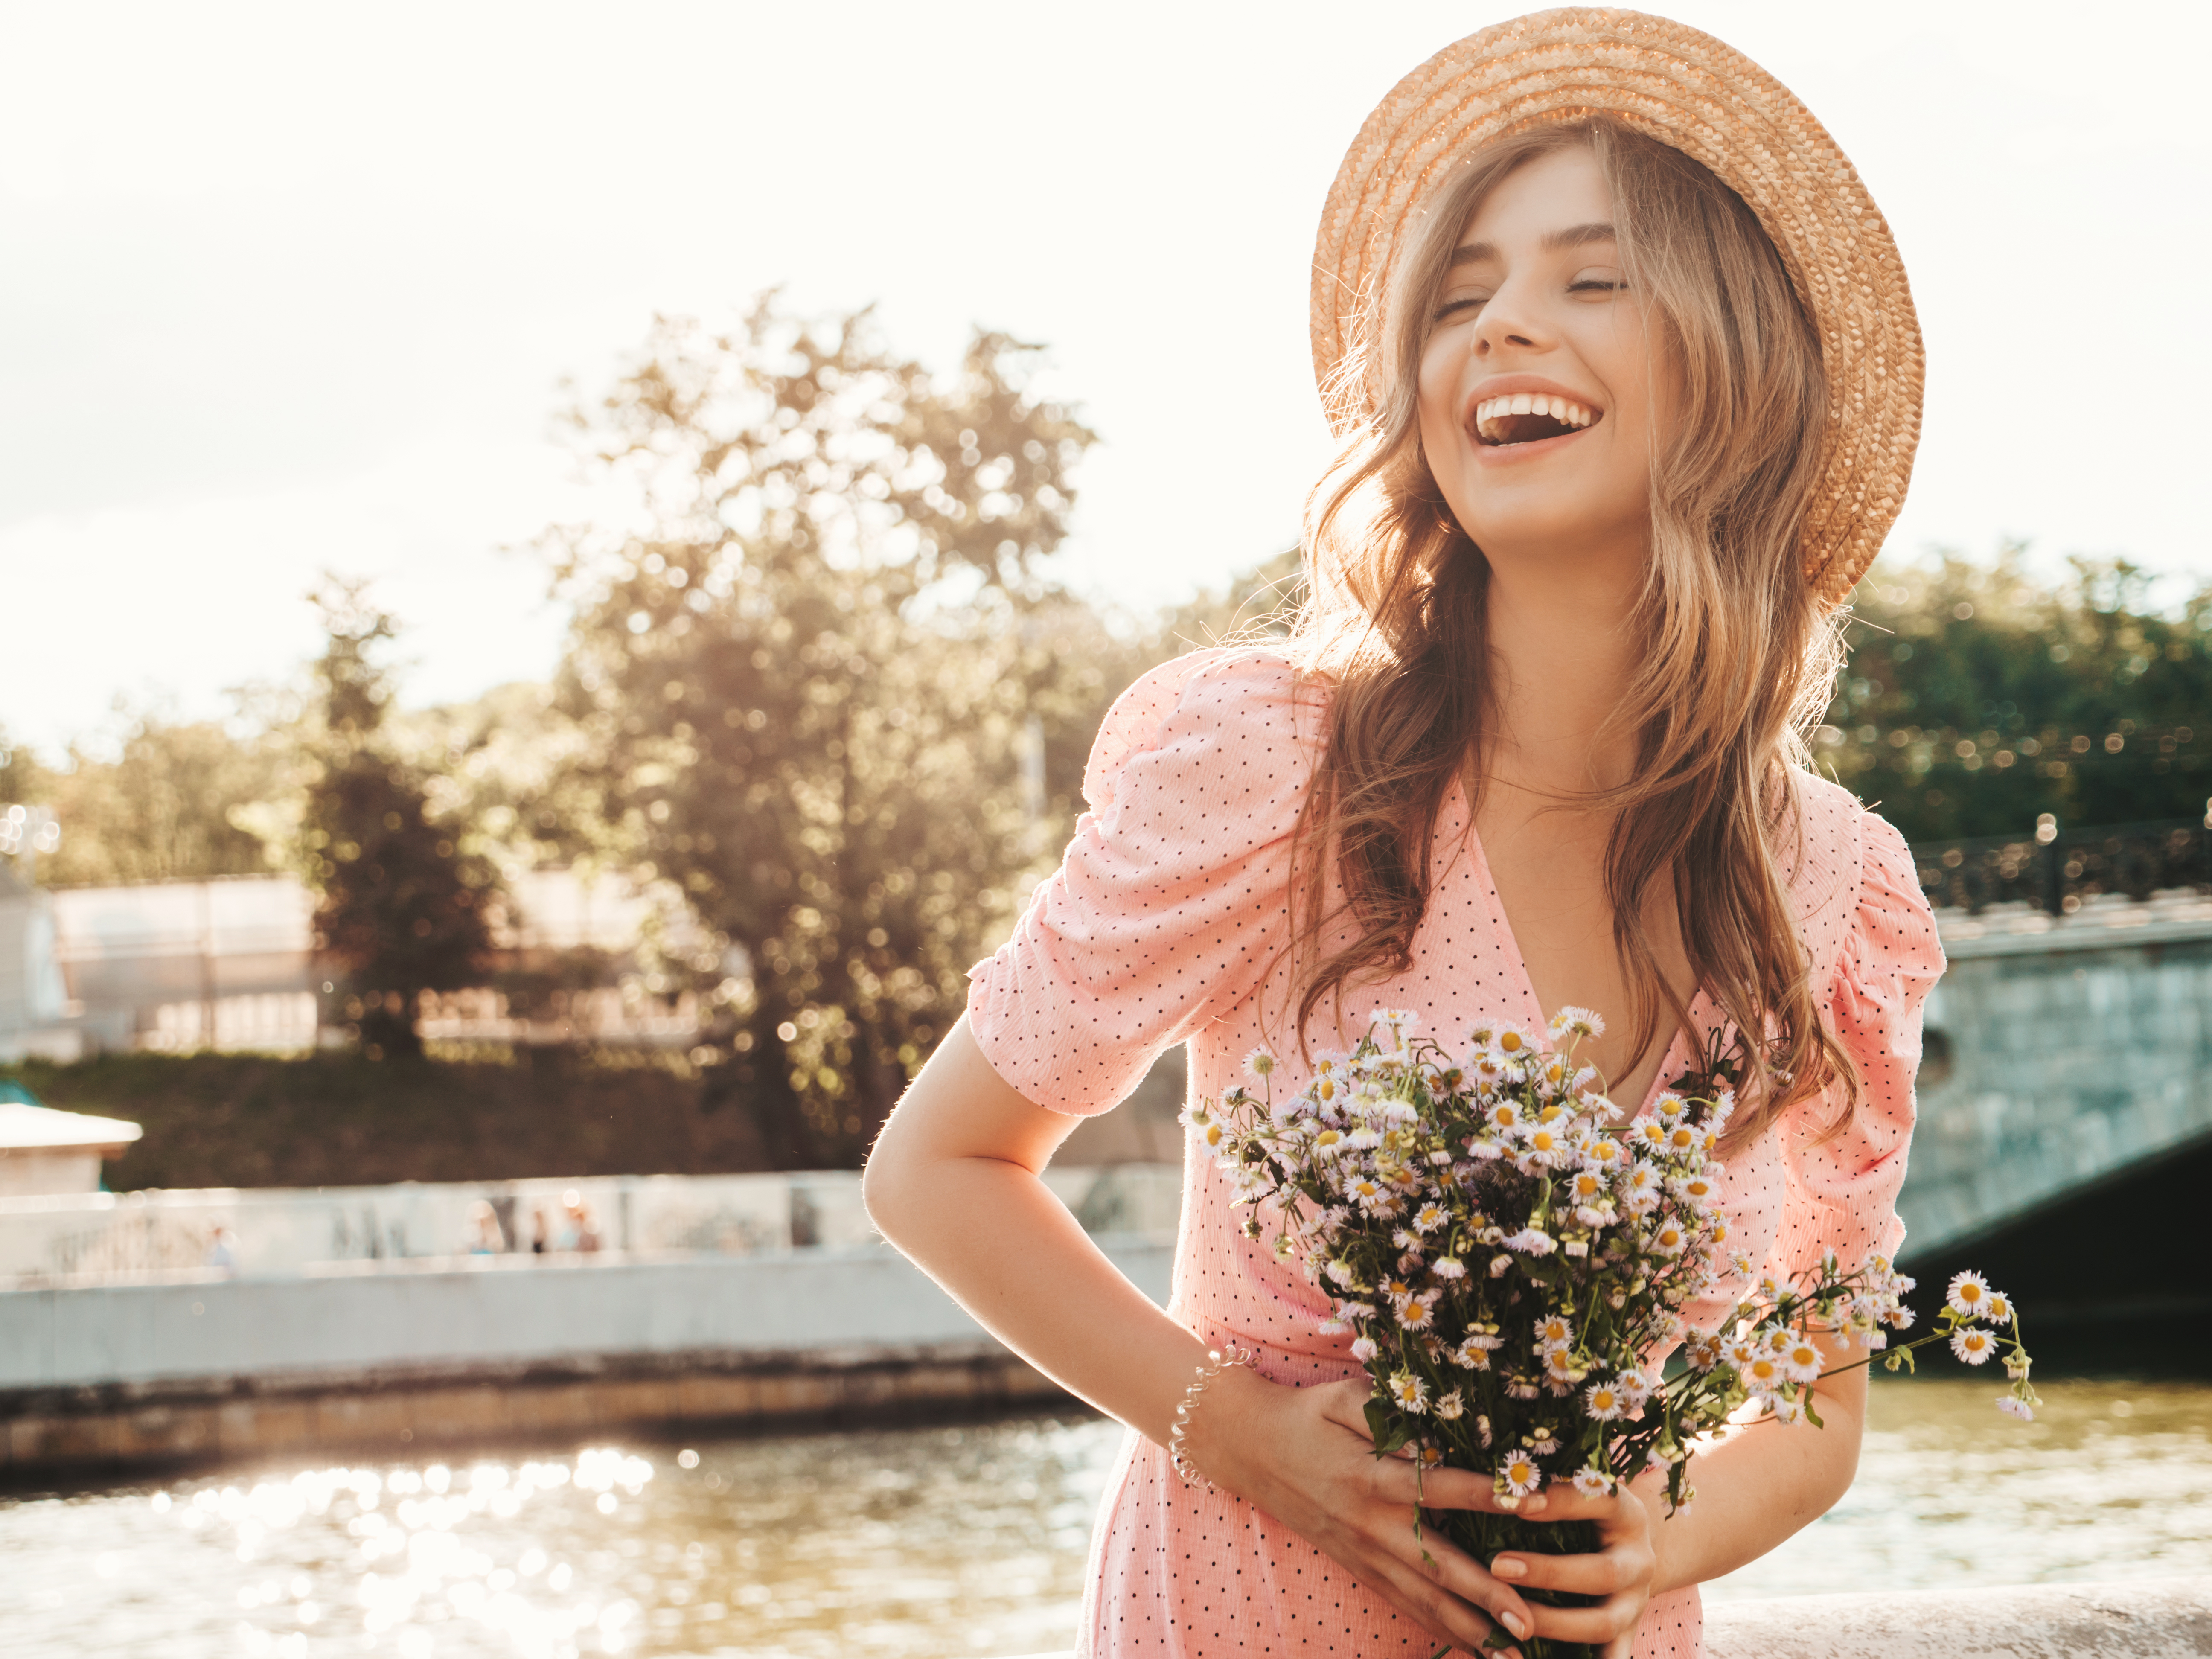 A smiling young woman holding flowers | Source: Shutterstock